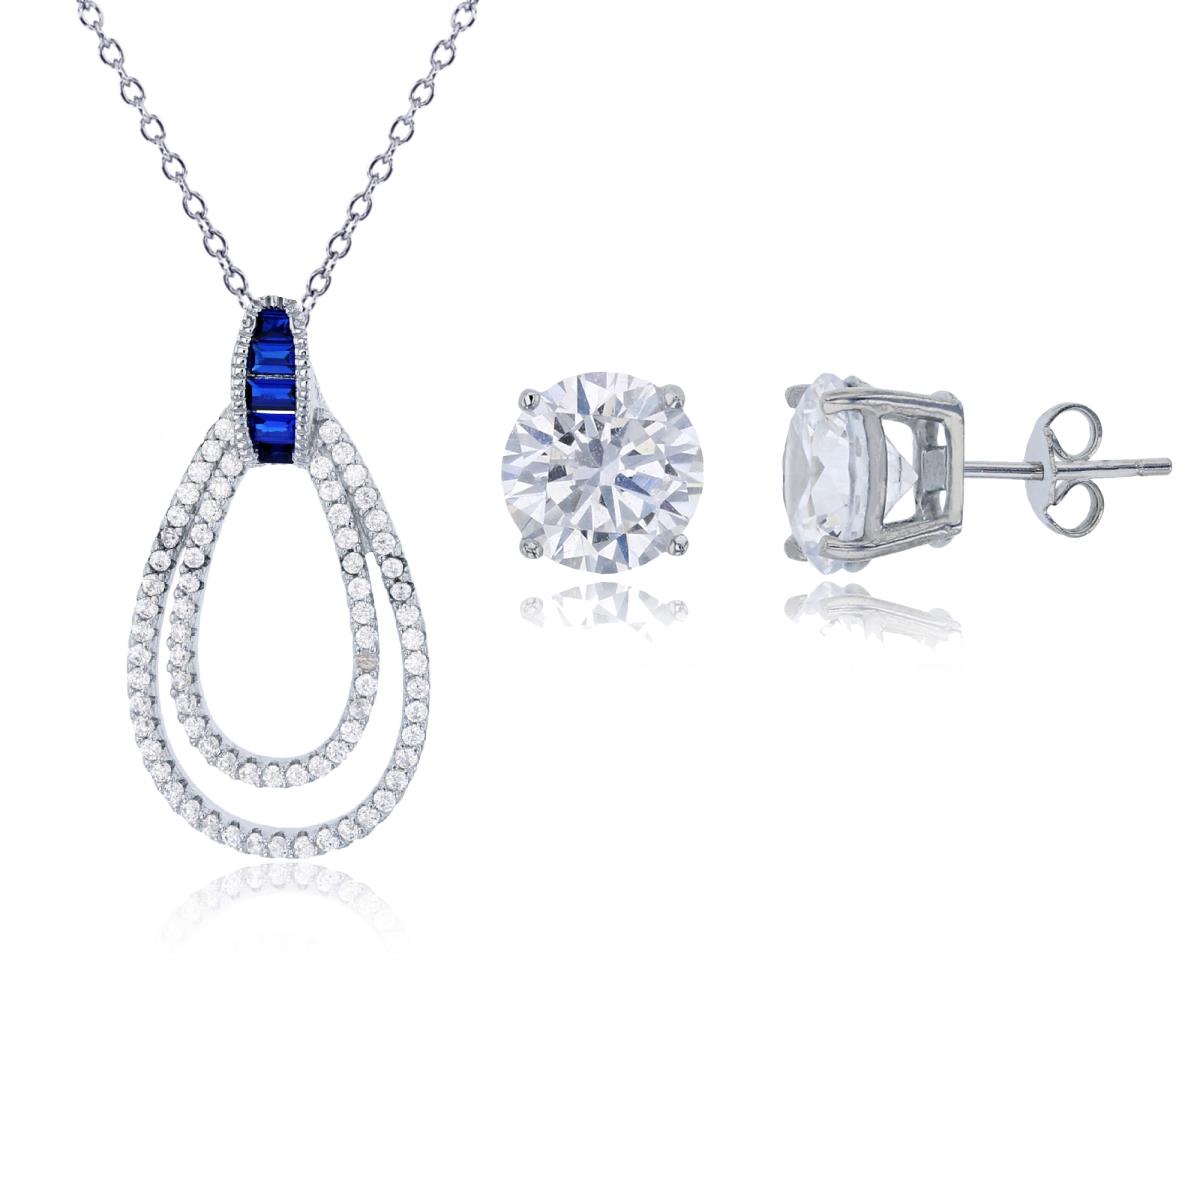 Sterling Silver Rhodium 28x15mm Micropave Double Open Pear Shape Sapphire Baguette Bail 18"+2" Necklace & 8mm Rd Solitaire Earring Set